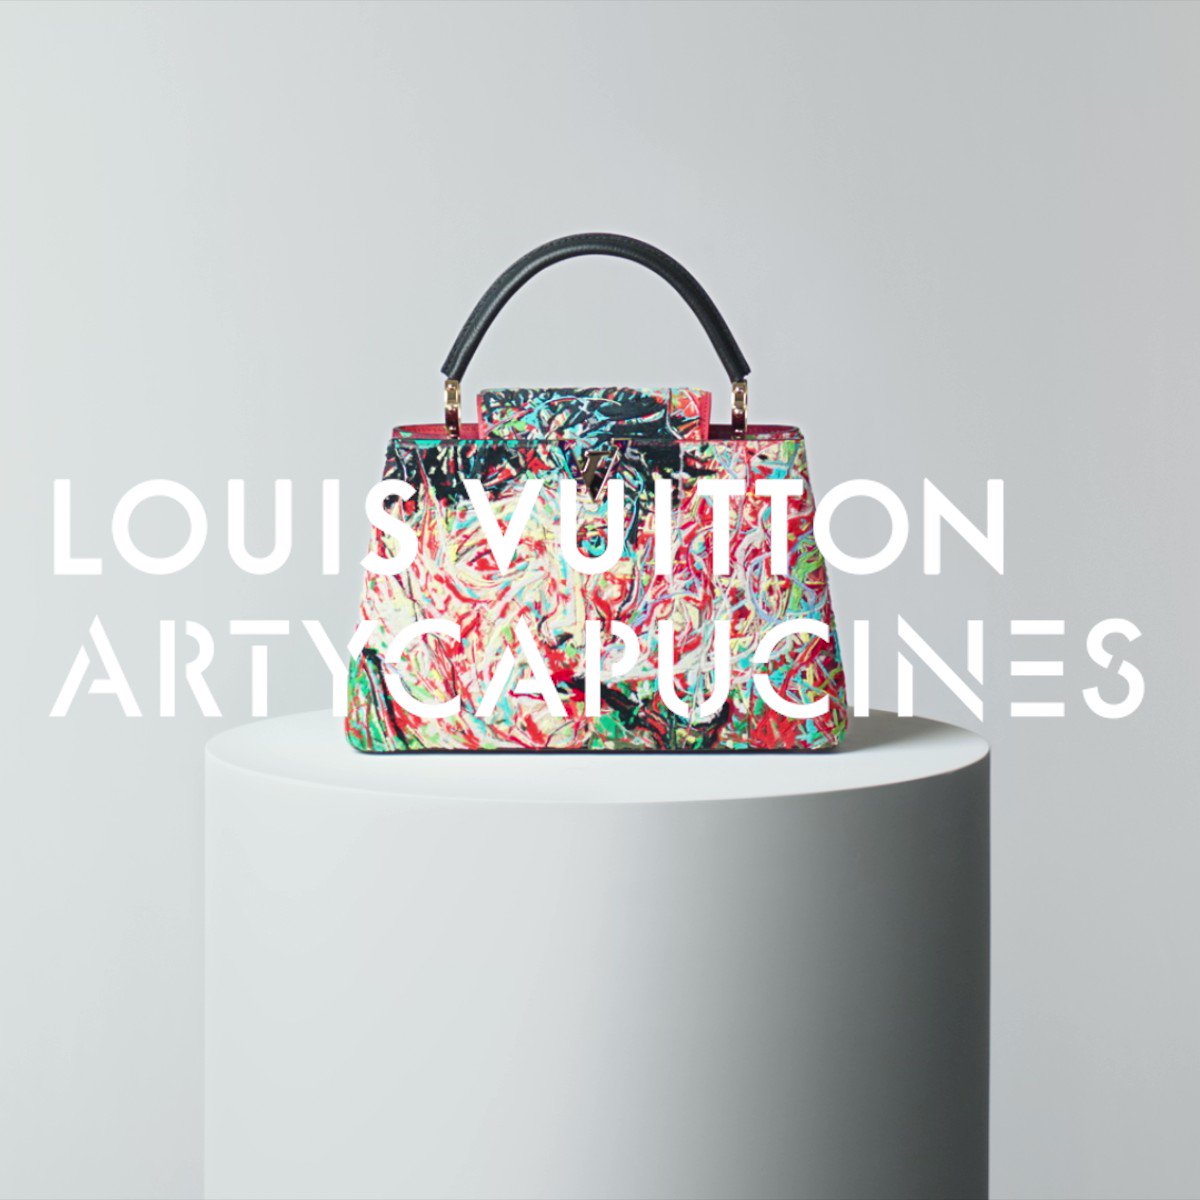 Louis Vuitton on X: Artycapucines Auction. Combining modern artistry with # LouisVuitton's savoir-faire, the #LVCapucines' iconic design has inspired  the creativity of numerous international artists. Discover the collection  and join the #SothebysParis